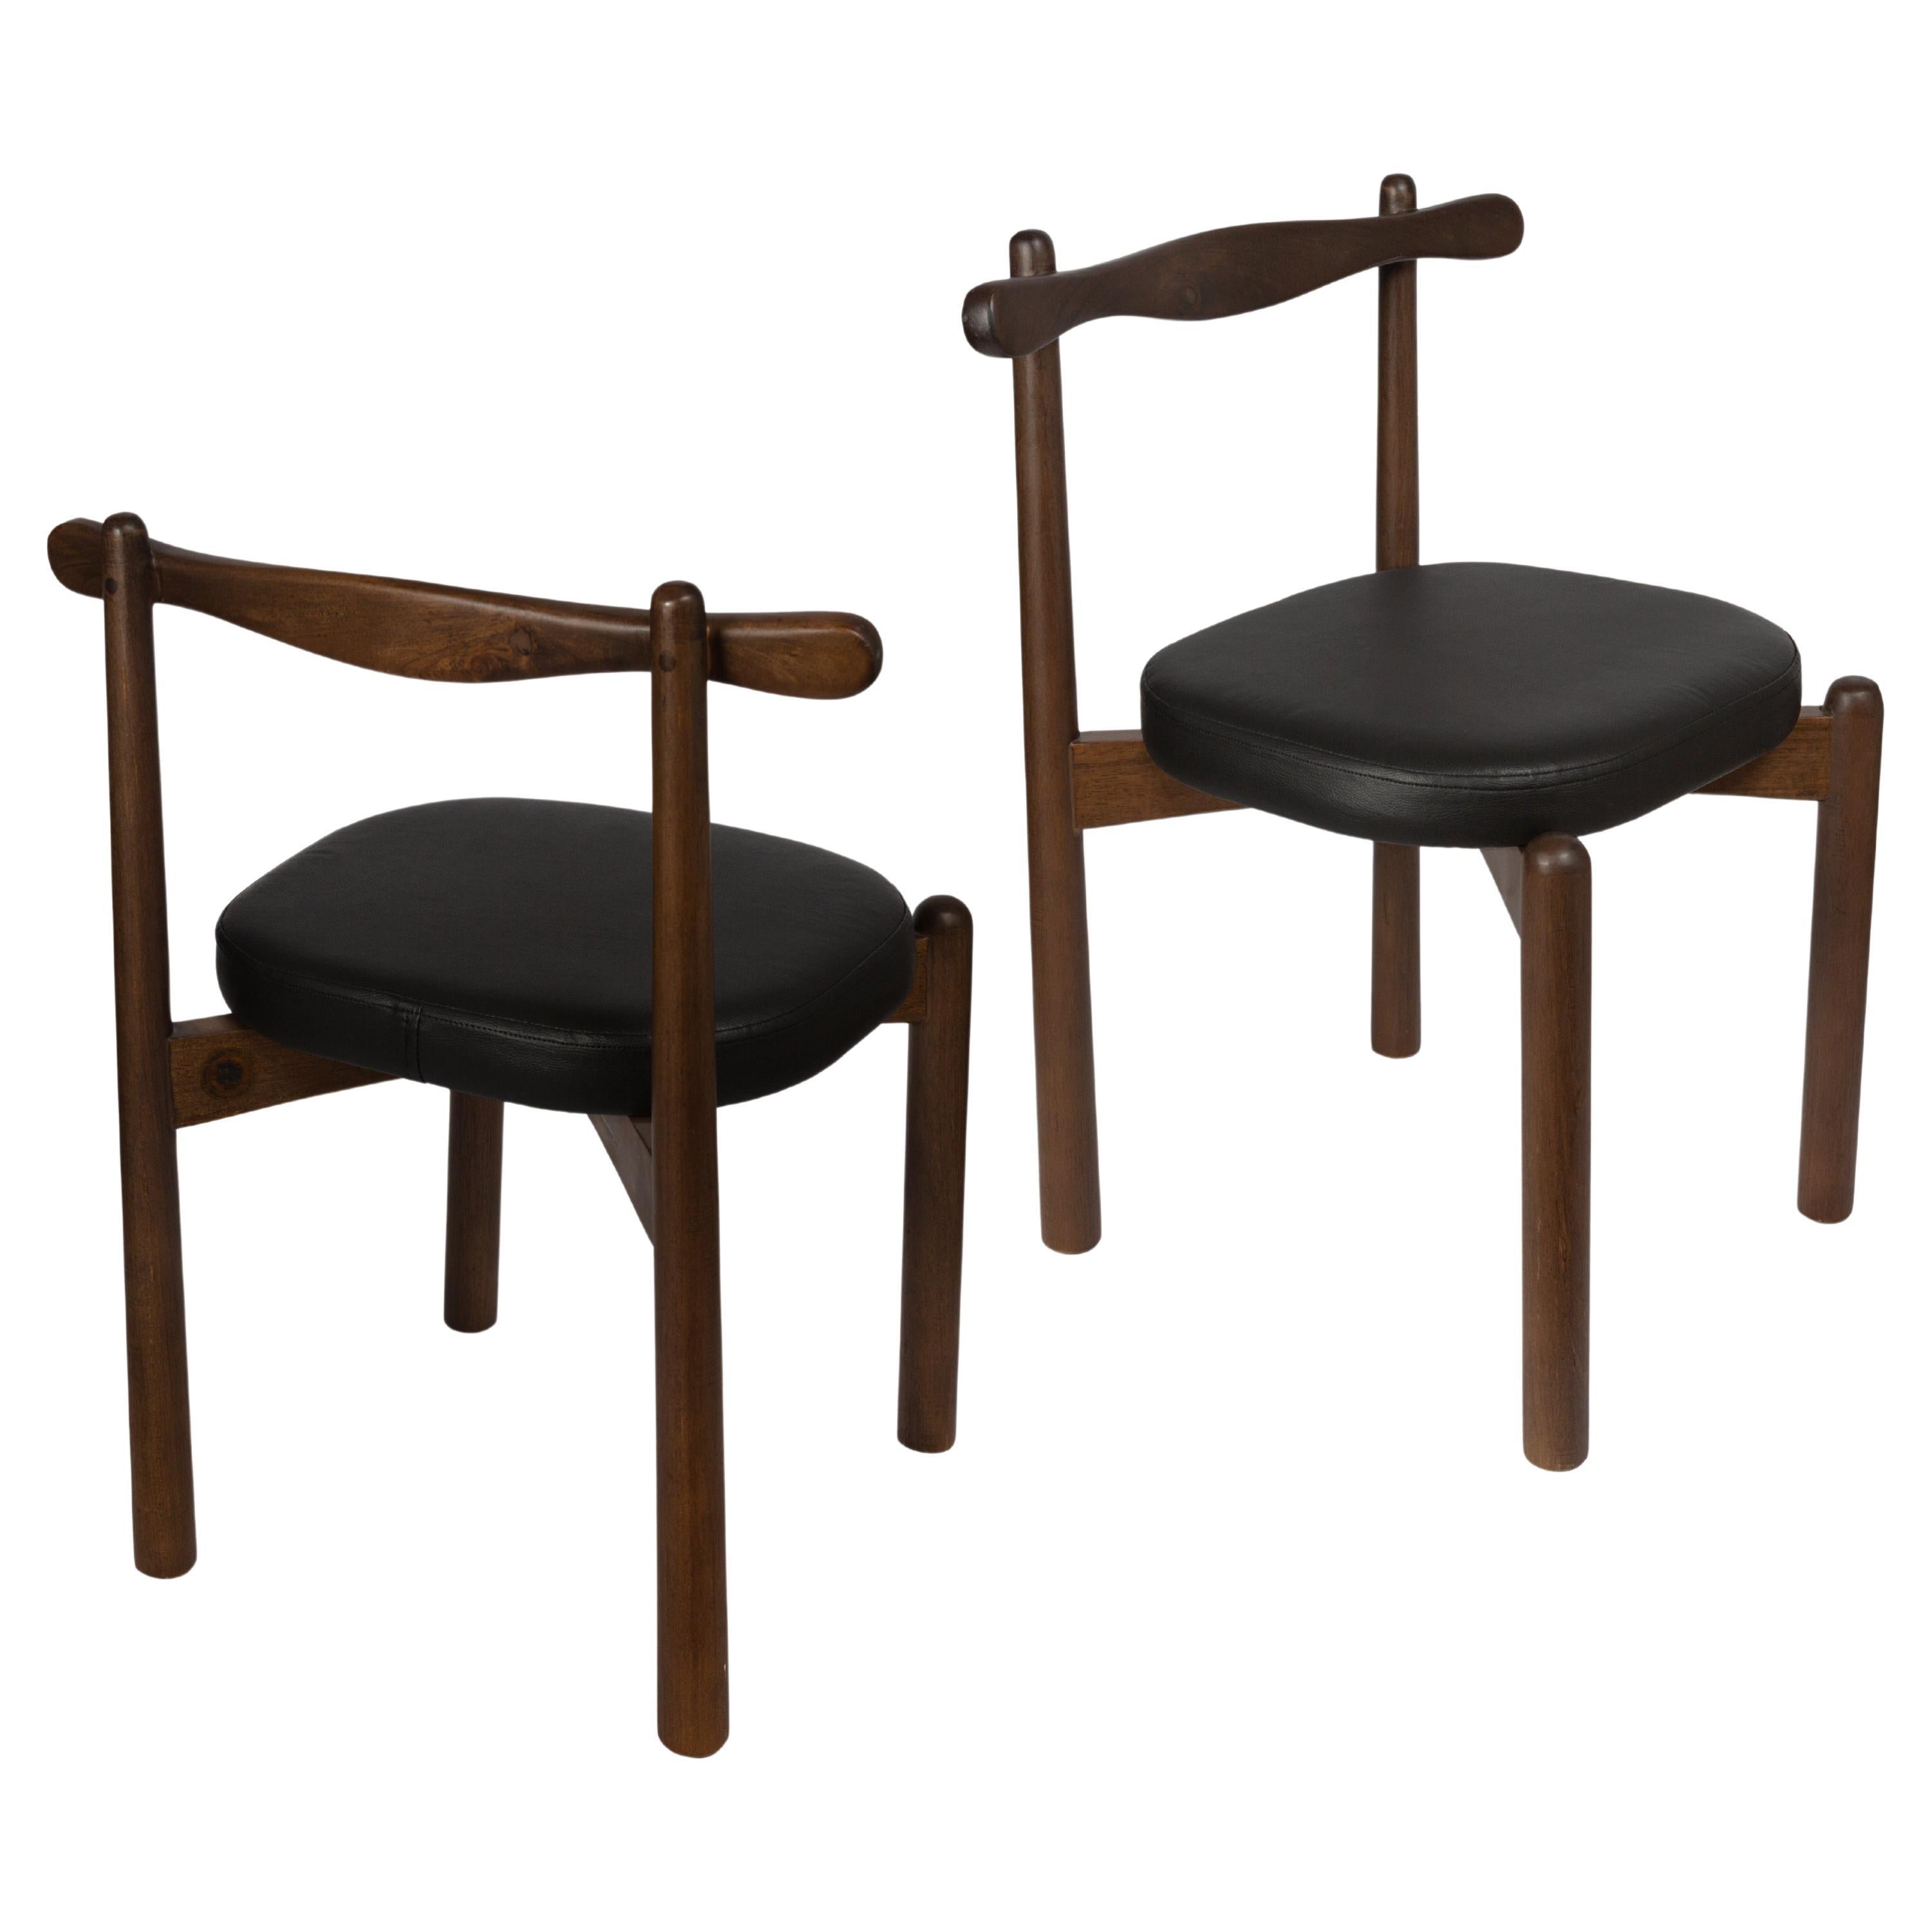 Set of 2 Dining Chairs Uçá Light Brown Wood (fabric ref : F07)